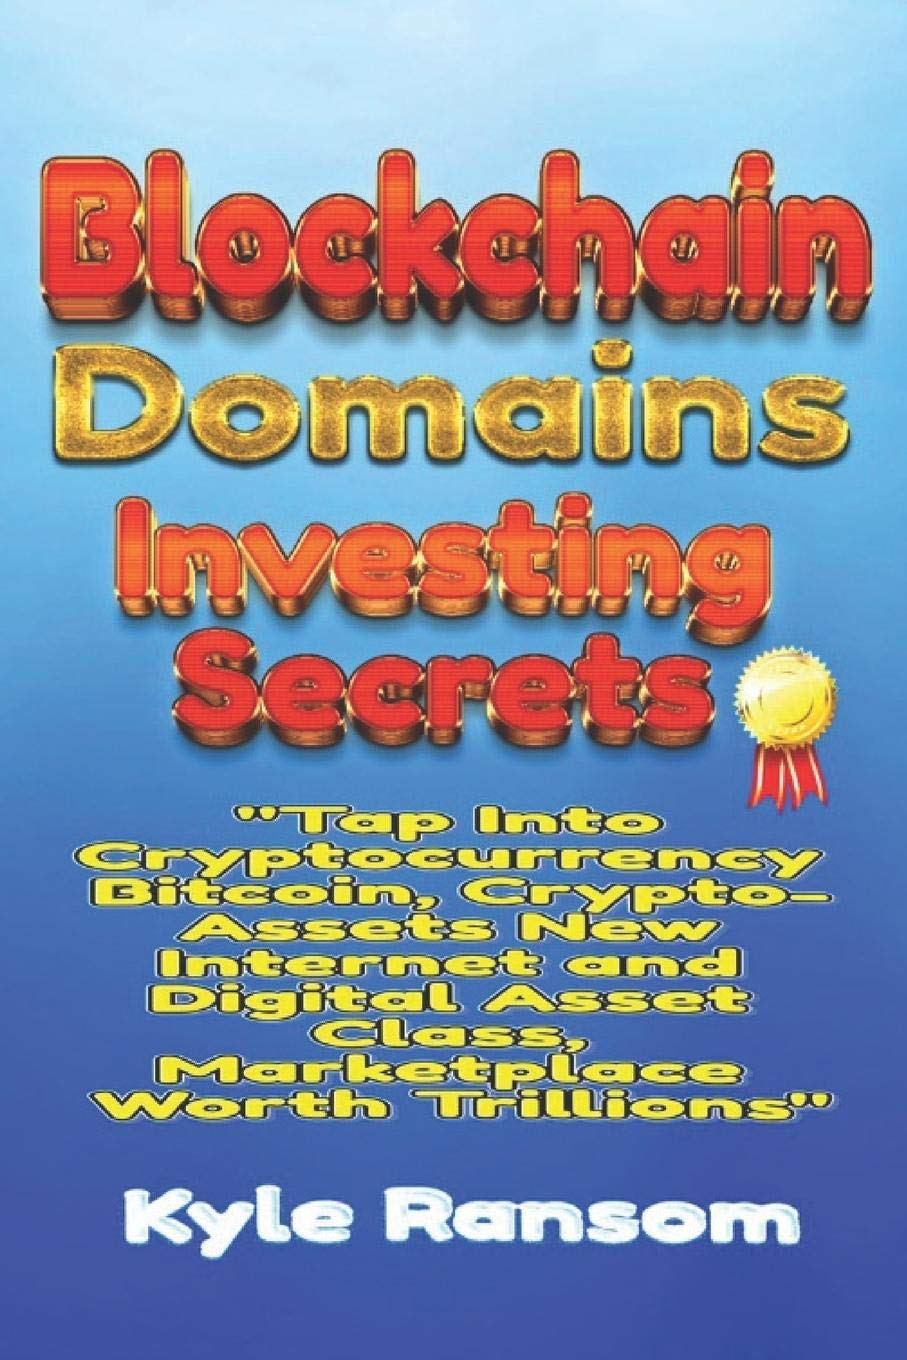 Blockchain Domains Investing Book Free On Amazon Kindle